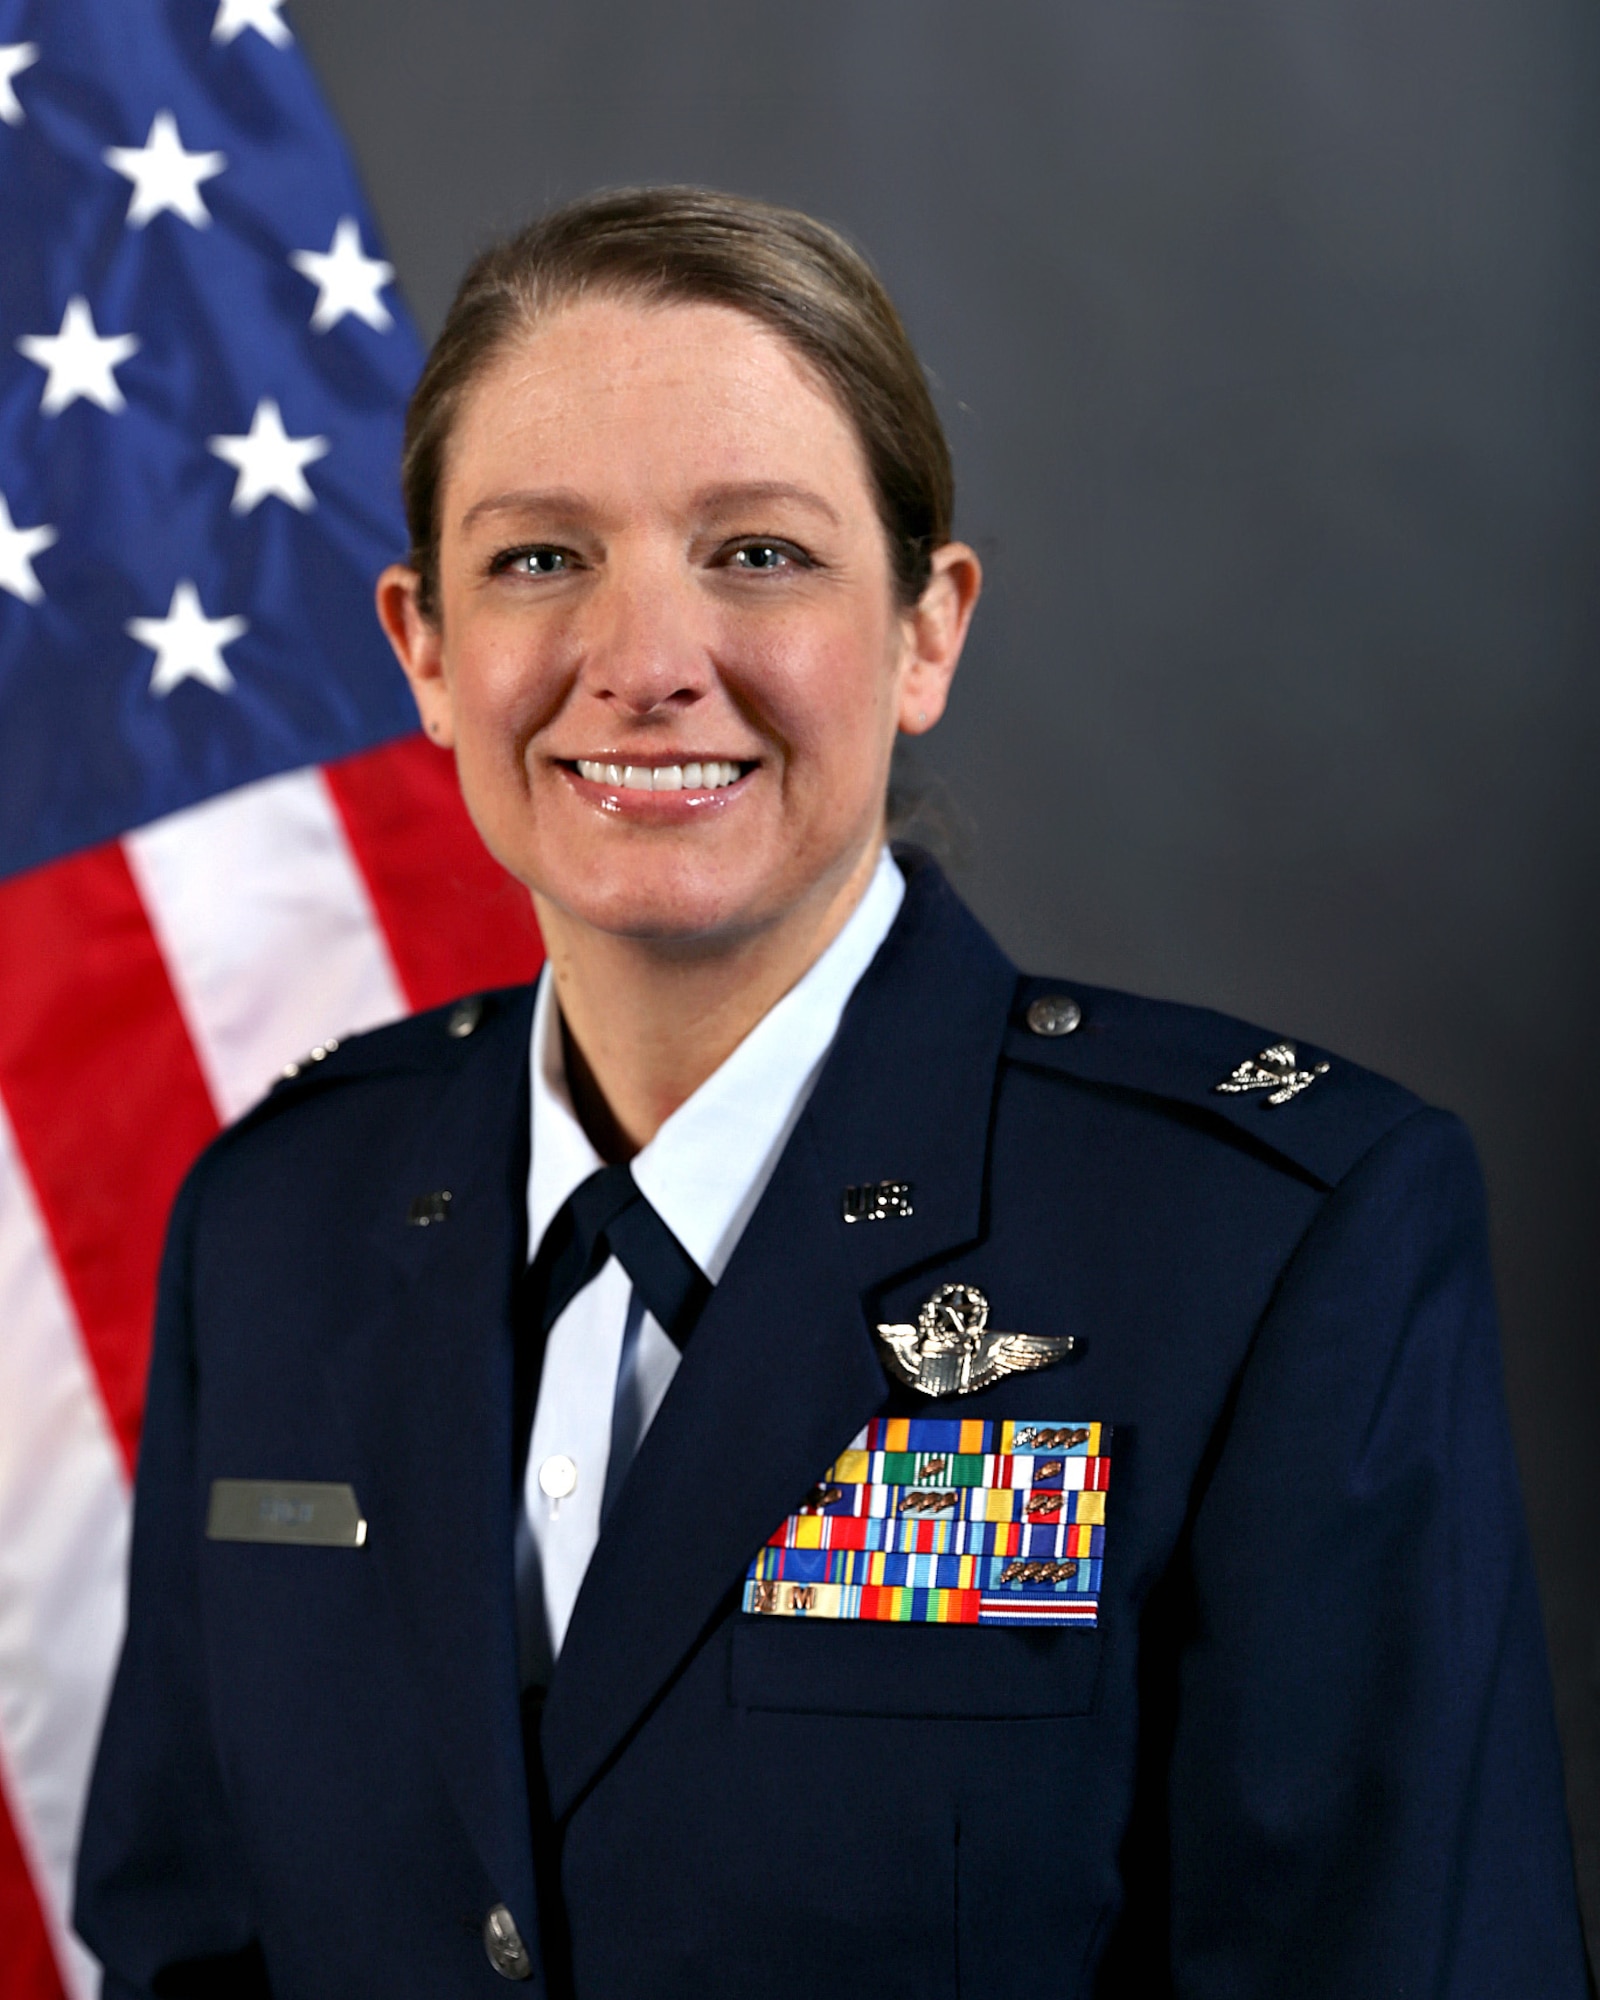 Sonya L. Finch is the Mission Support Group Commander